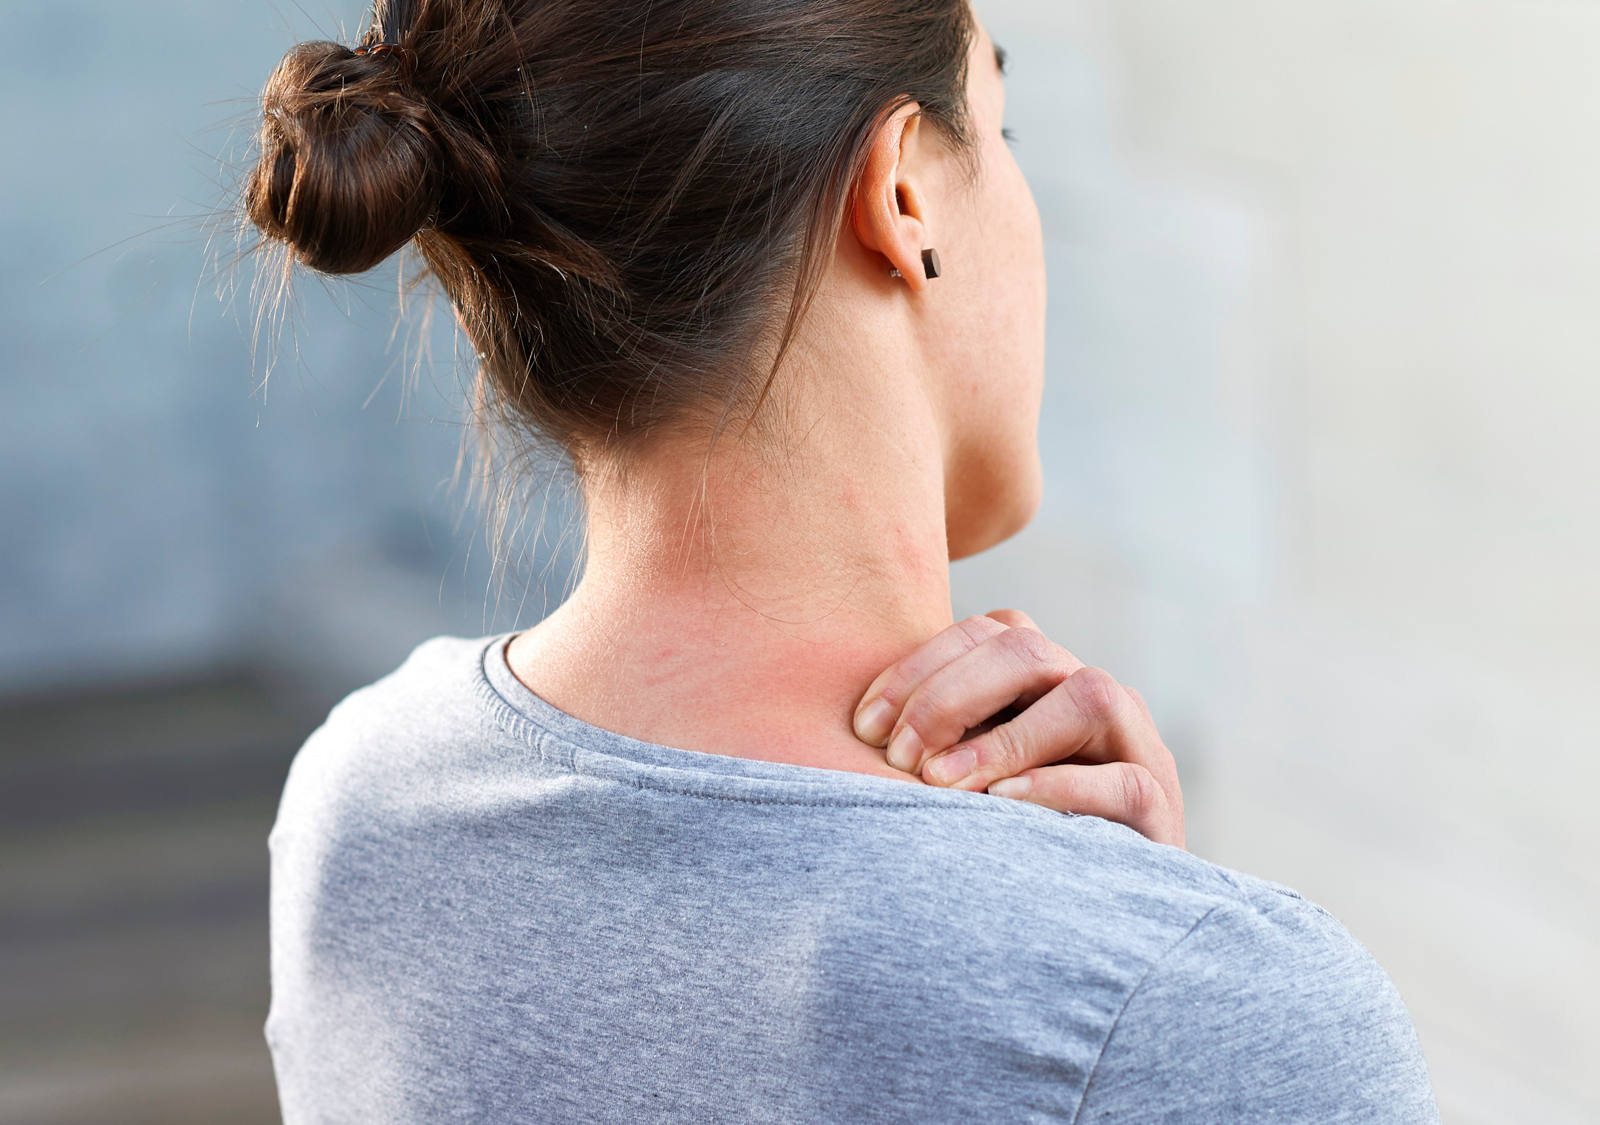 Neck massage: Stroke on one side from back to front 